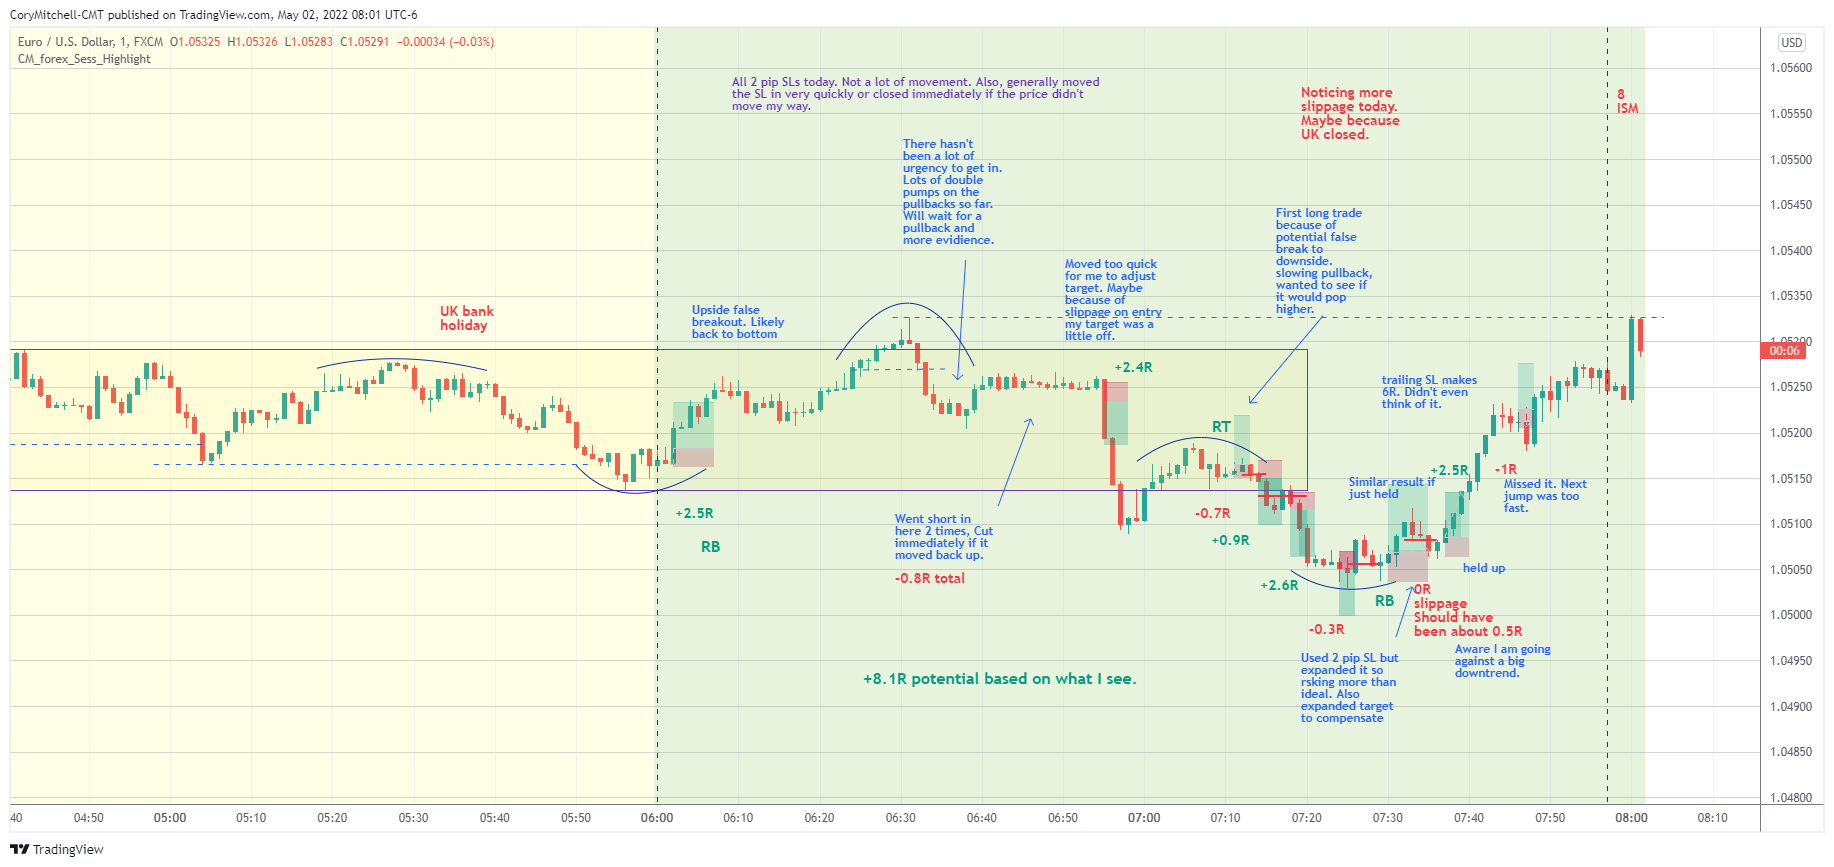 examples of trade triggers when day trading the EURUSD 1-minute chart